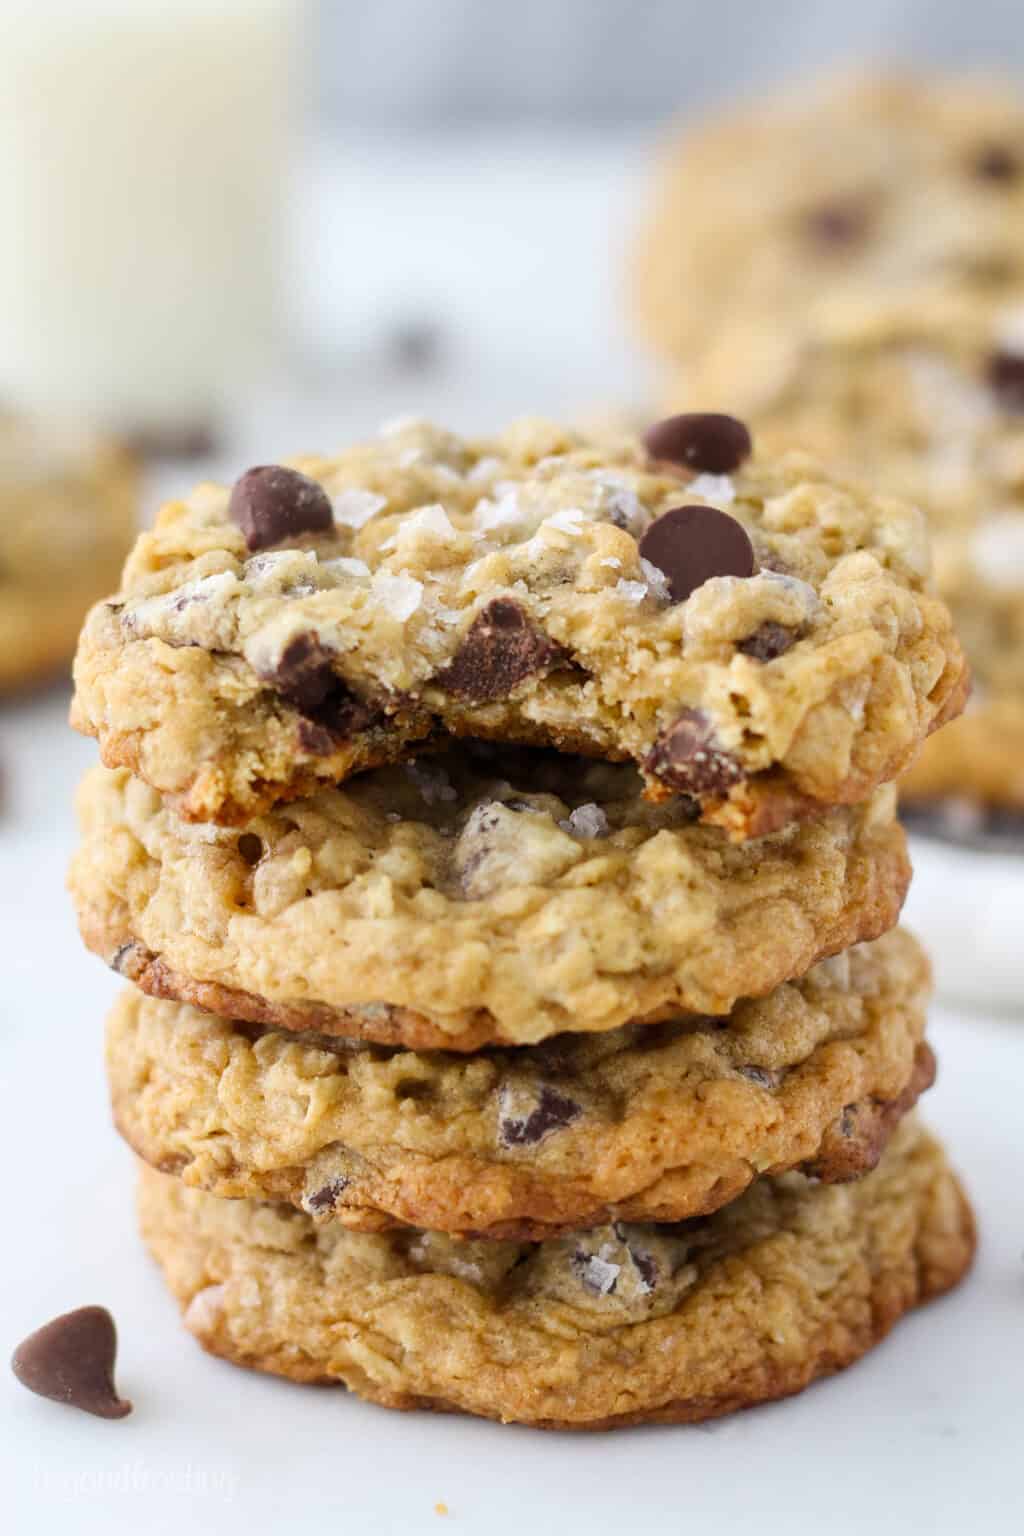 Oatmeal Chocolate Chip Cookies with Salted Caramel | Beyond Frosting